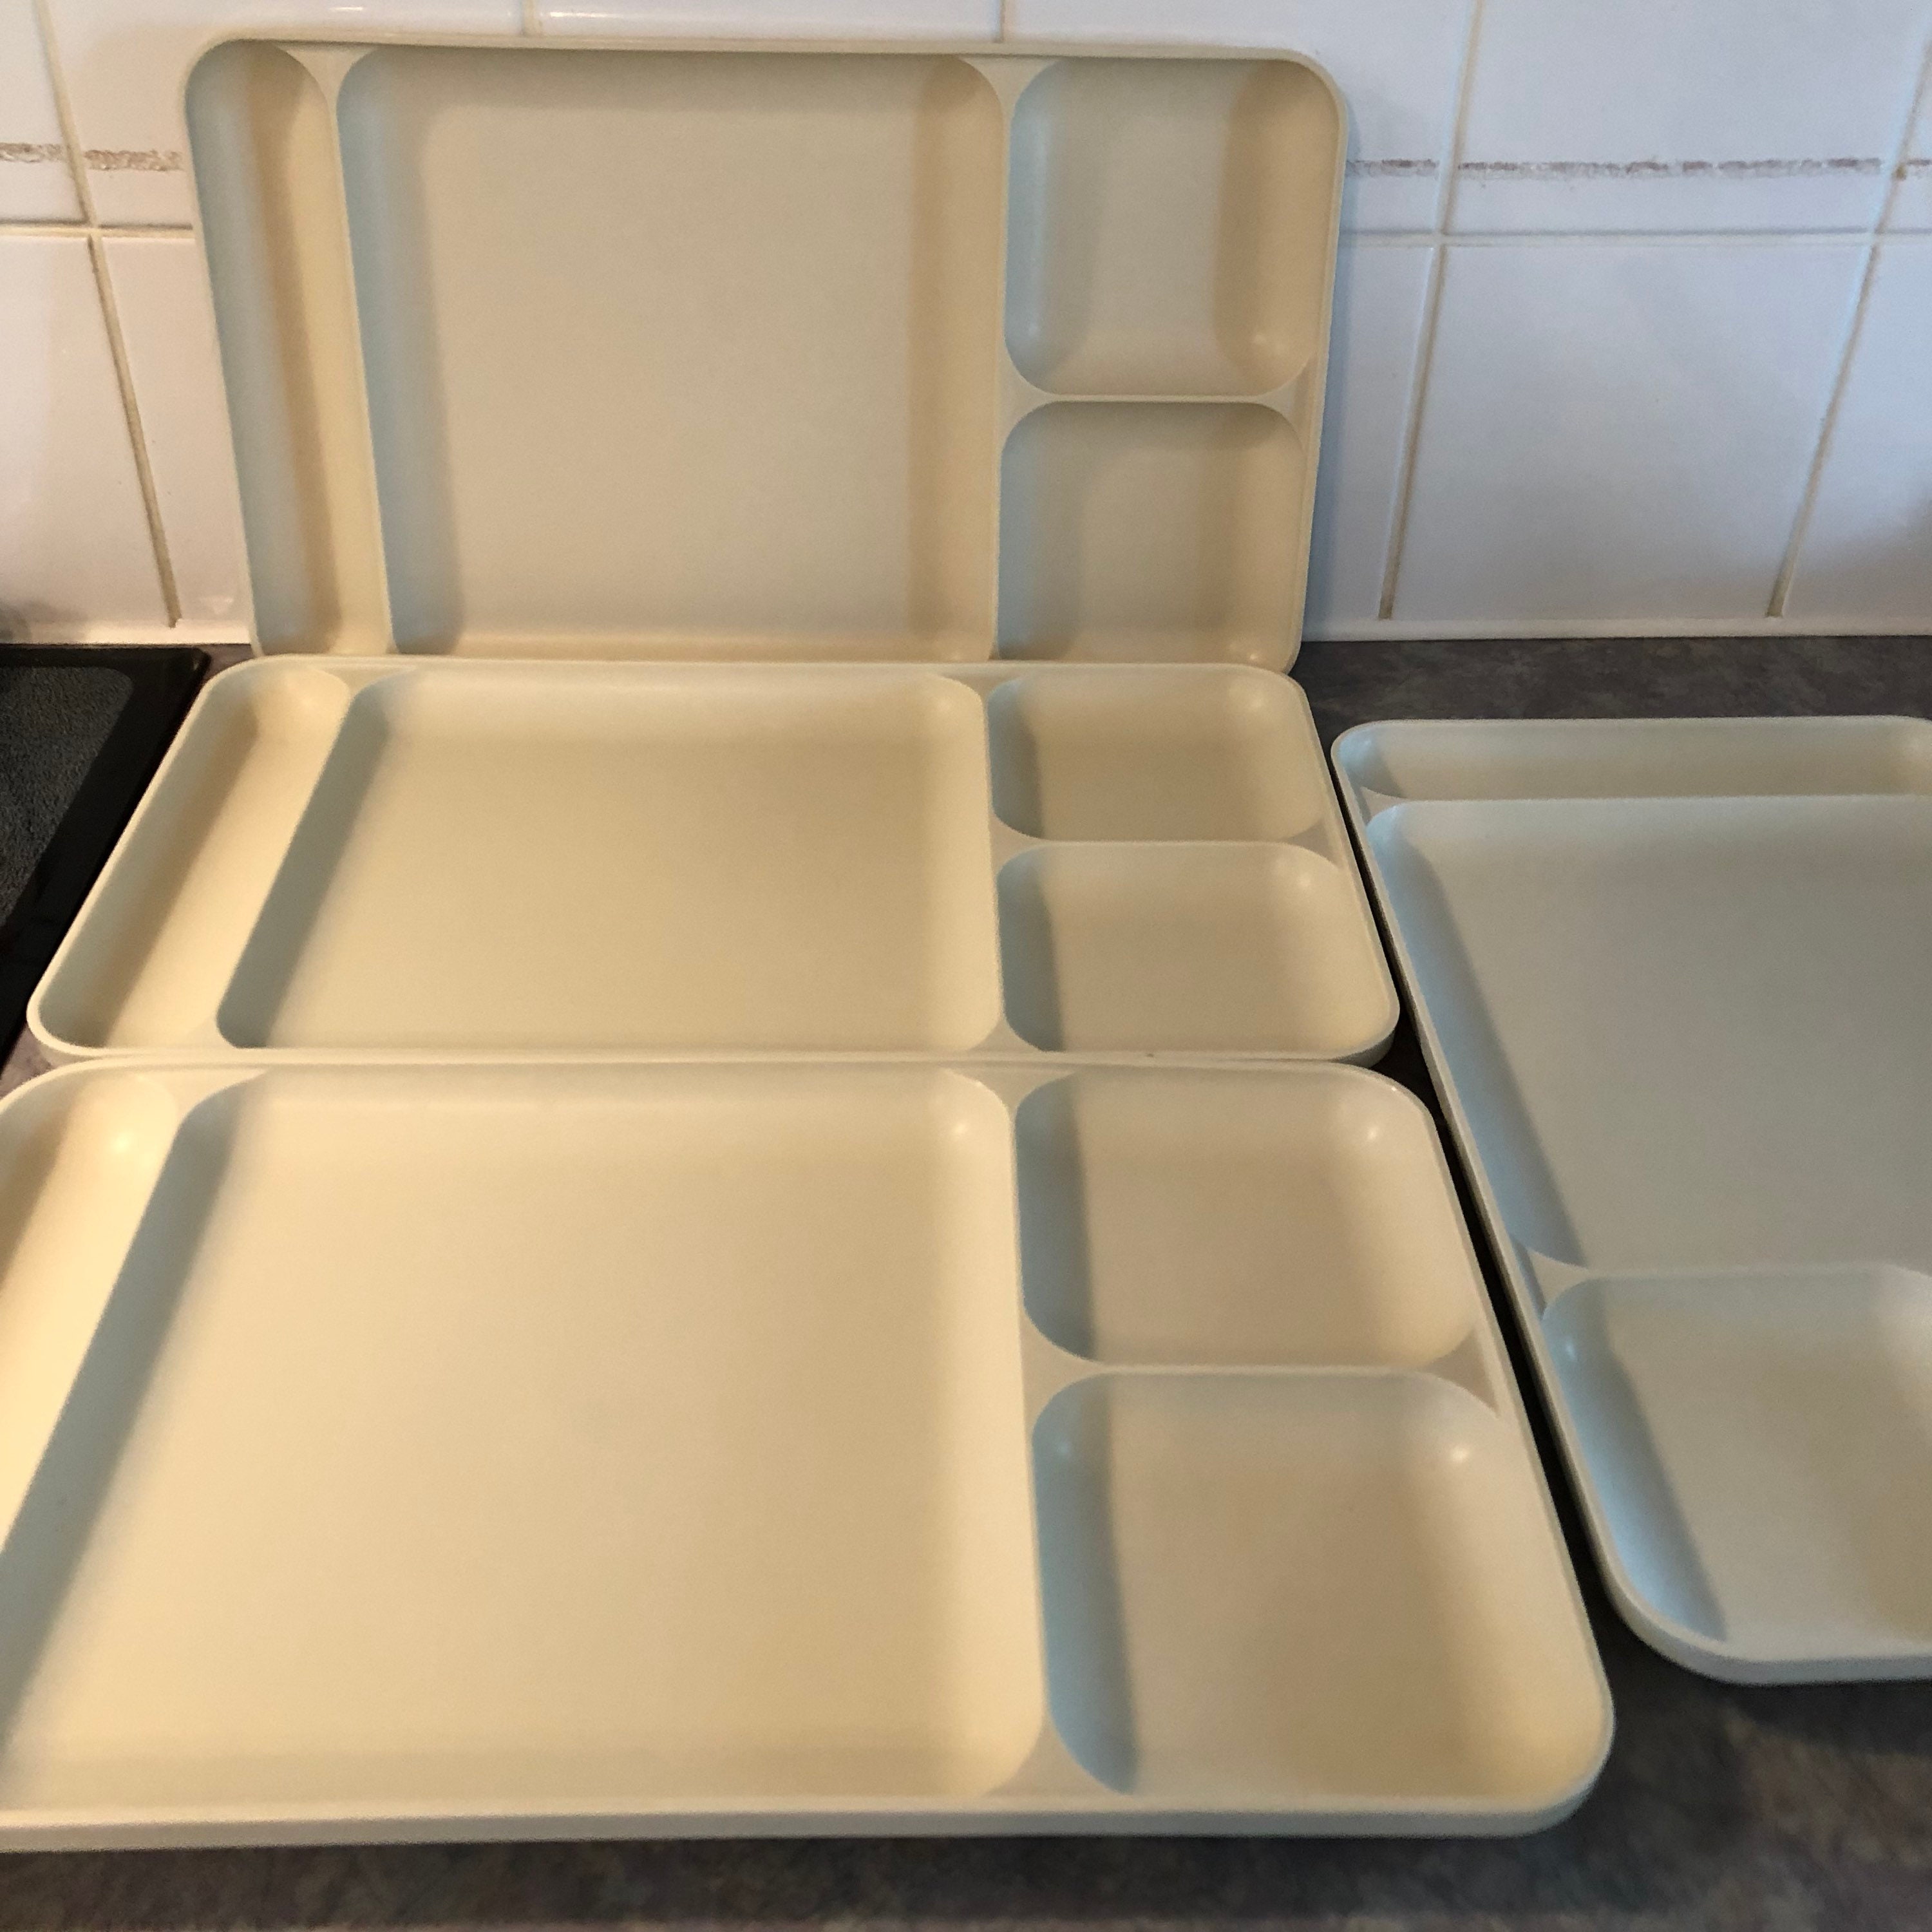 Vintage 70's Tupperware Cafeteria Style Trays 4 70's Plastic Prison Trays  70's Serving 70's TV Trays Cafeteria Trays Individual 